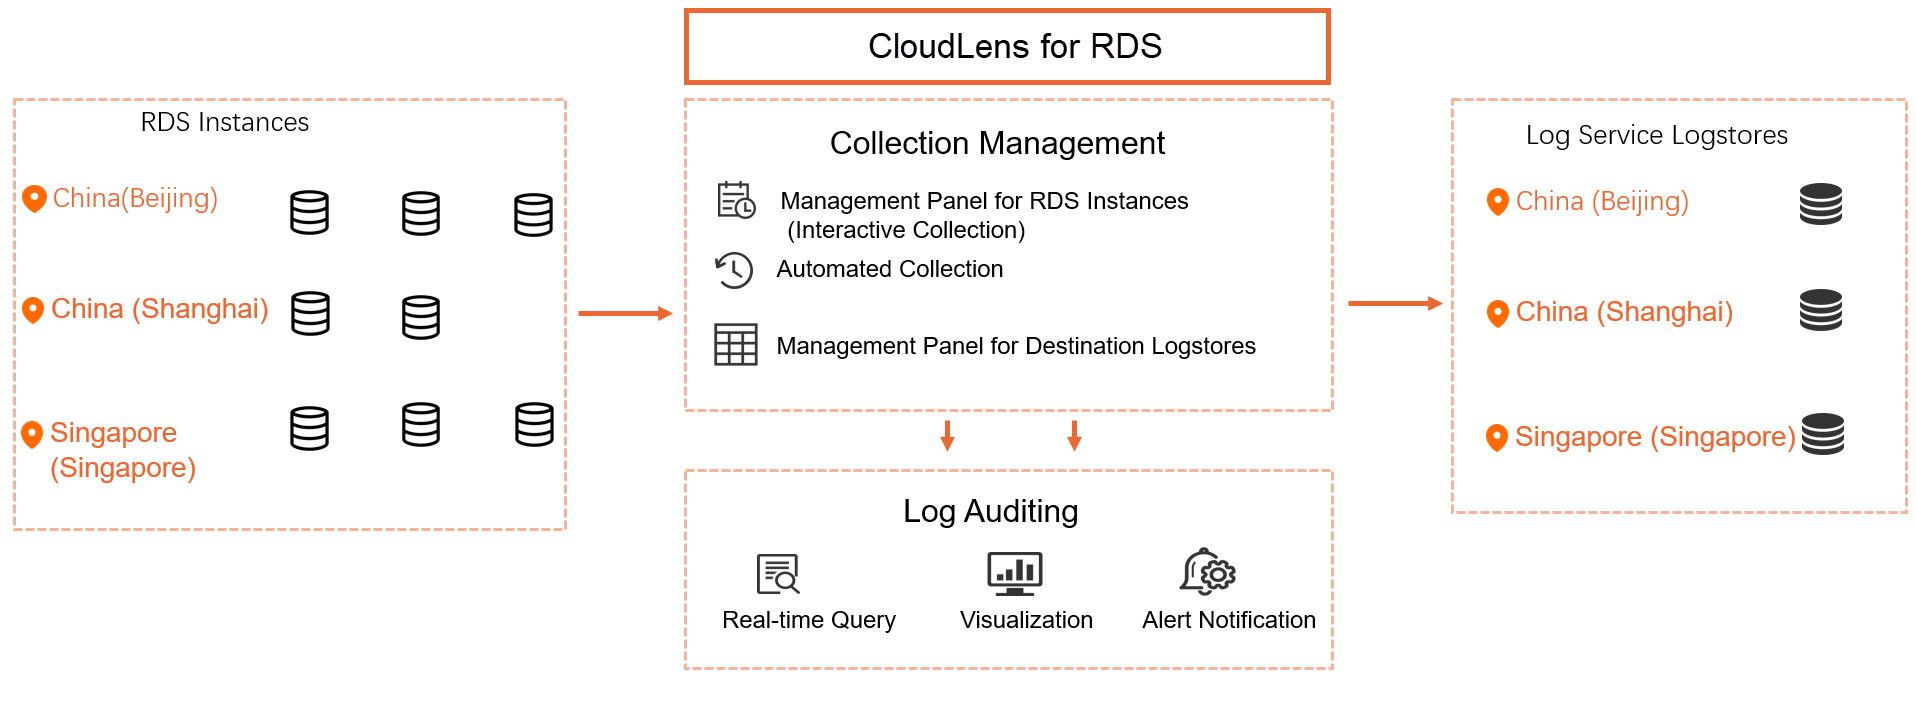 CloudLens for RDS